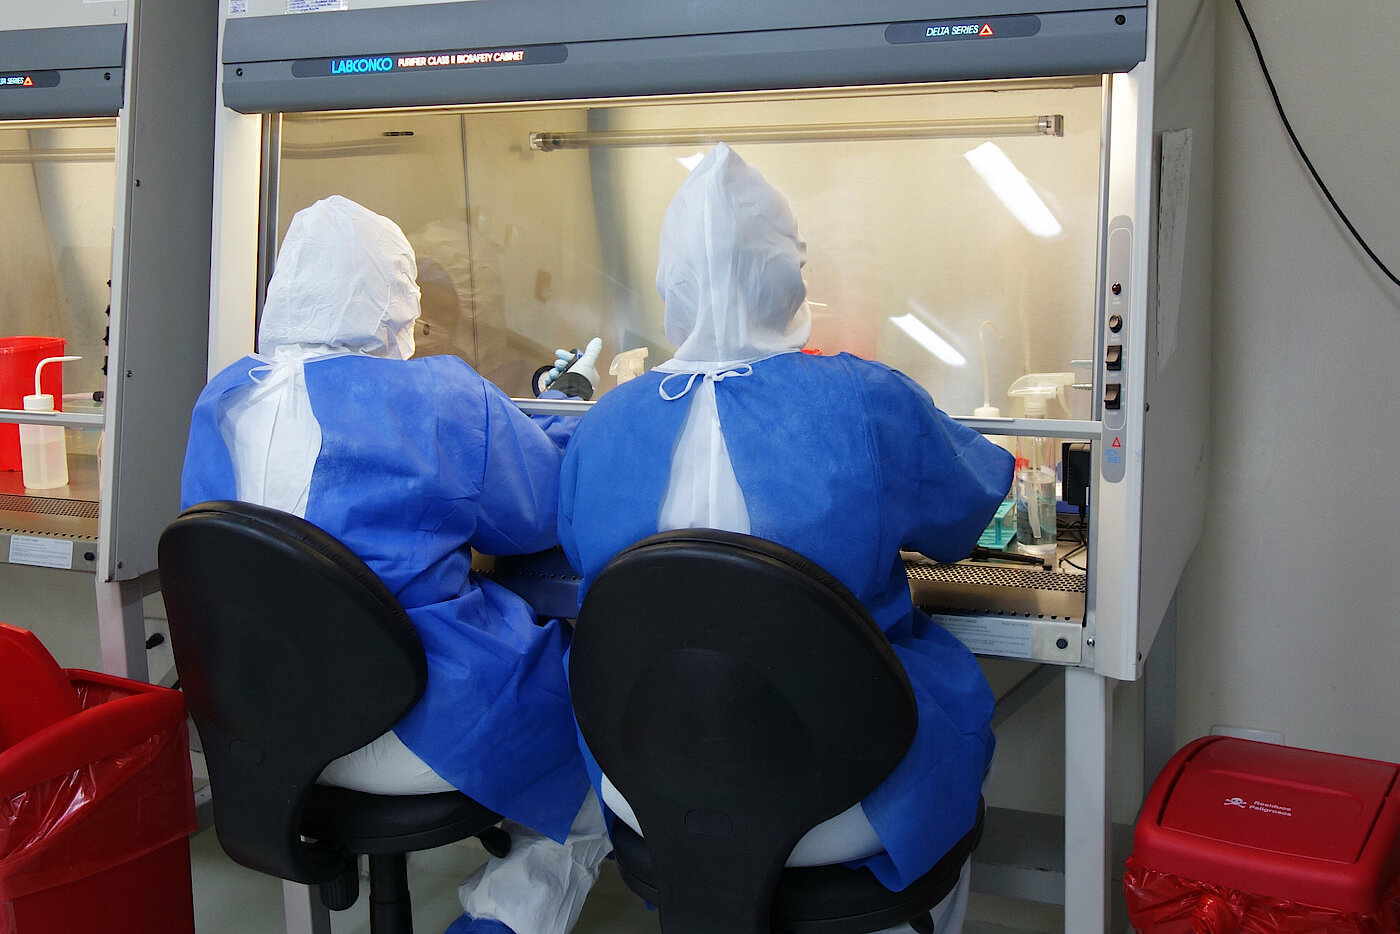 Photo: Two people in protective clothing working with their hands in a small laboratory with a glass front.